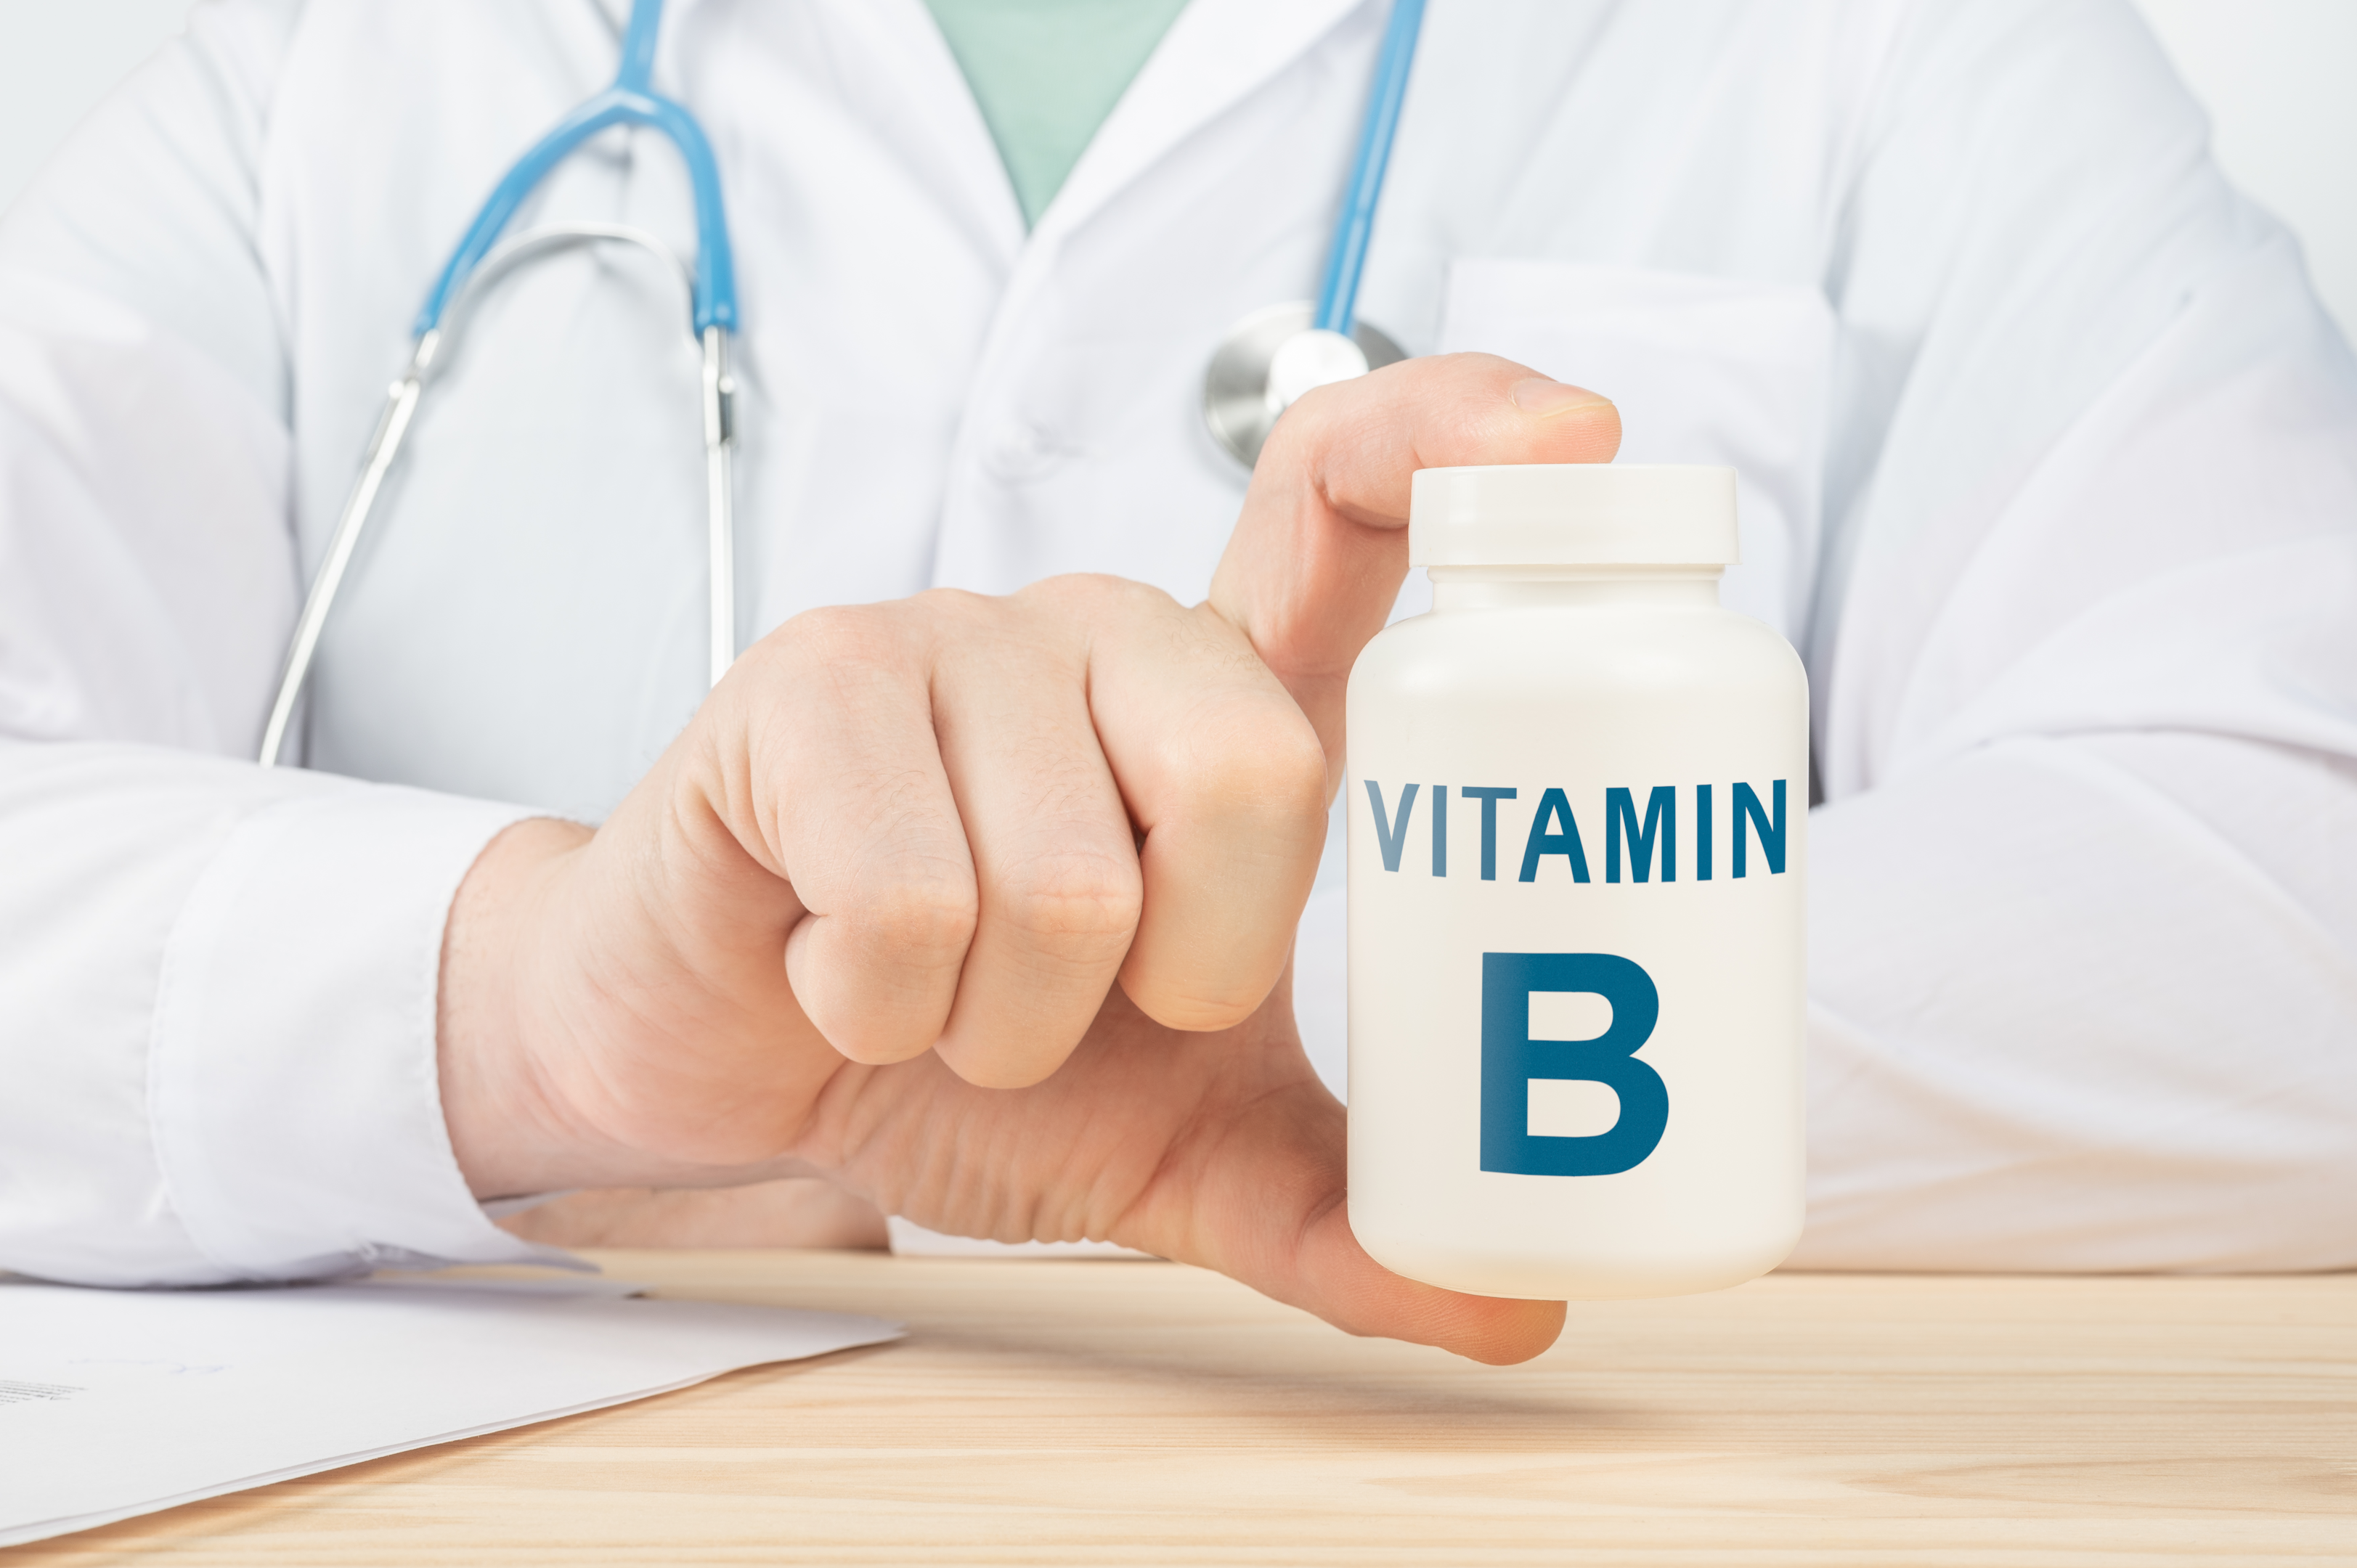 The B vitamins are your all-rounder health partner.